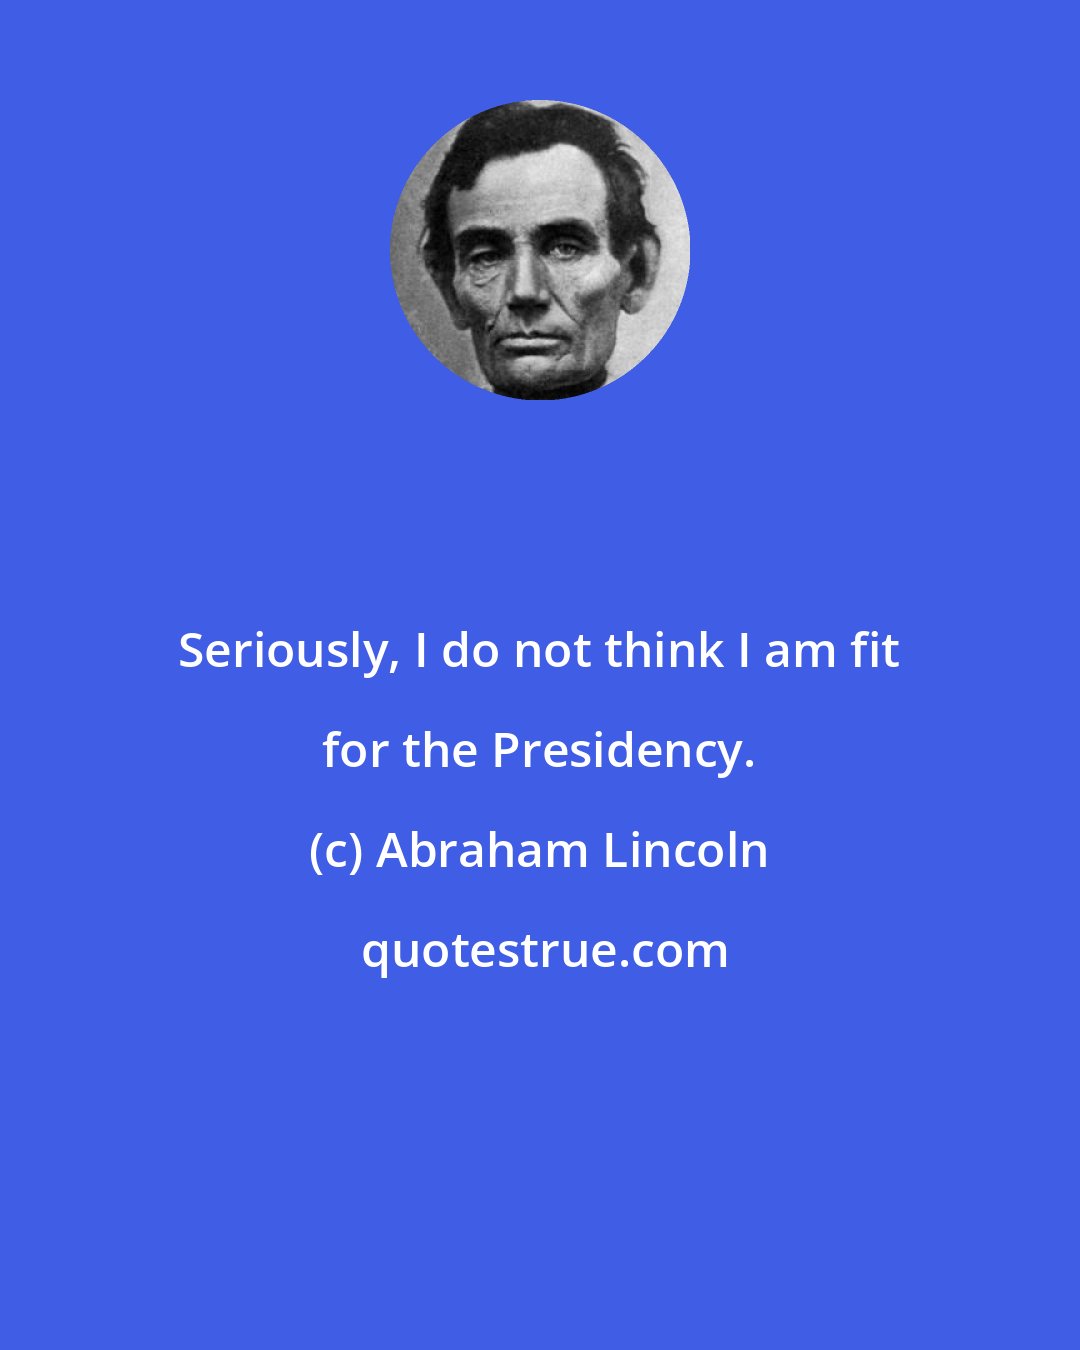 Abraham Lincoln: Seriously, I do not think I am fit for the Presidency.